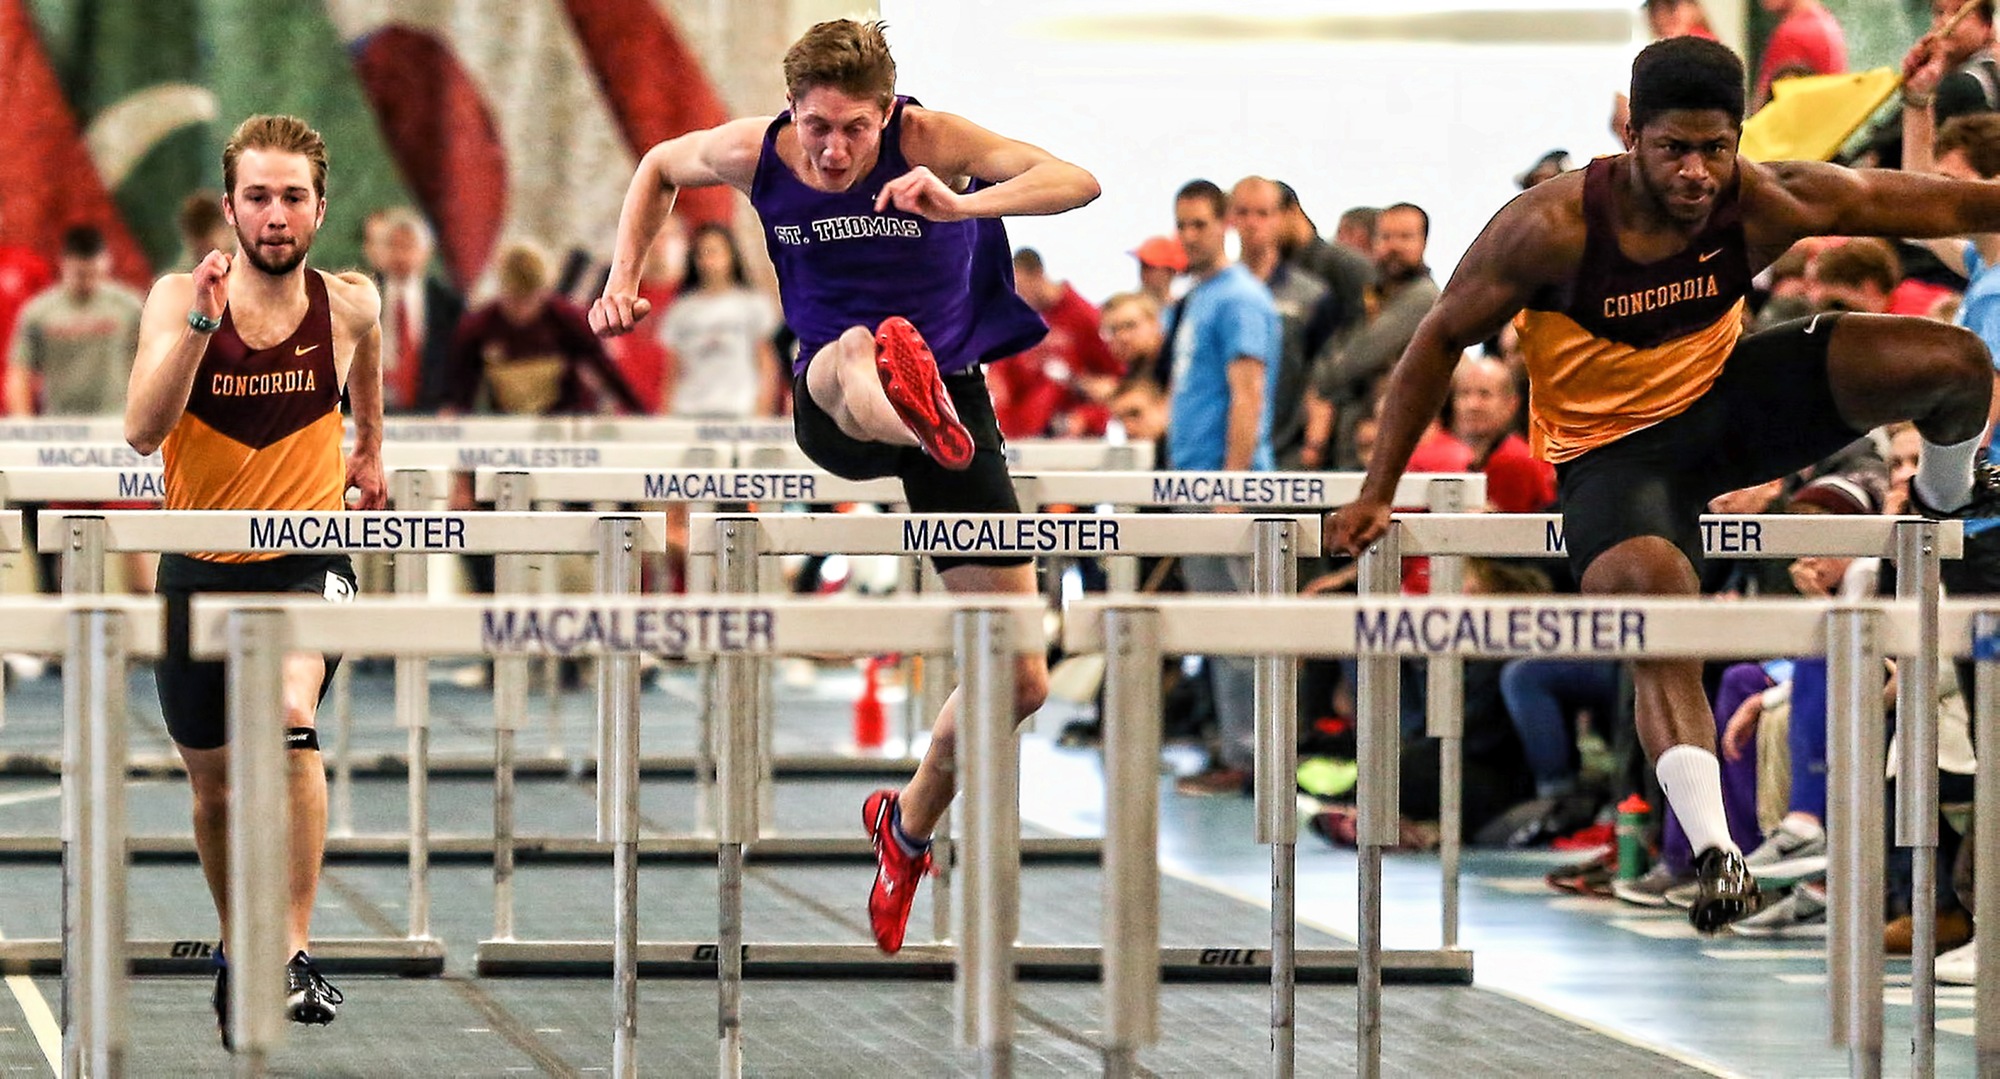 Willie Julkes (R) races through the 60-meter hurdles on his way to finishing in fifth place in the event. (Photo courtesy of Nathan Lodermeier)